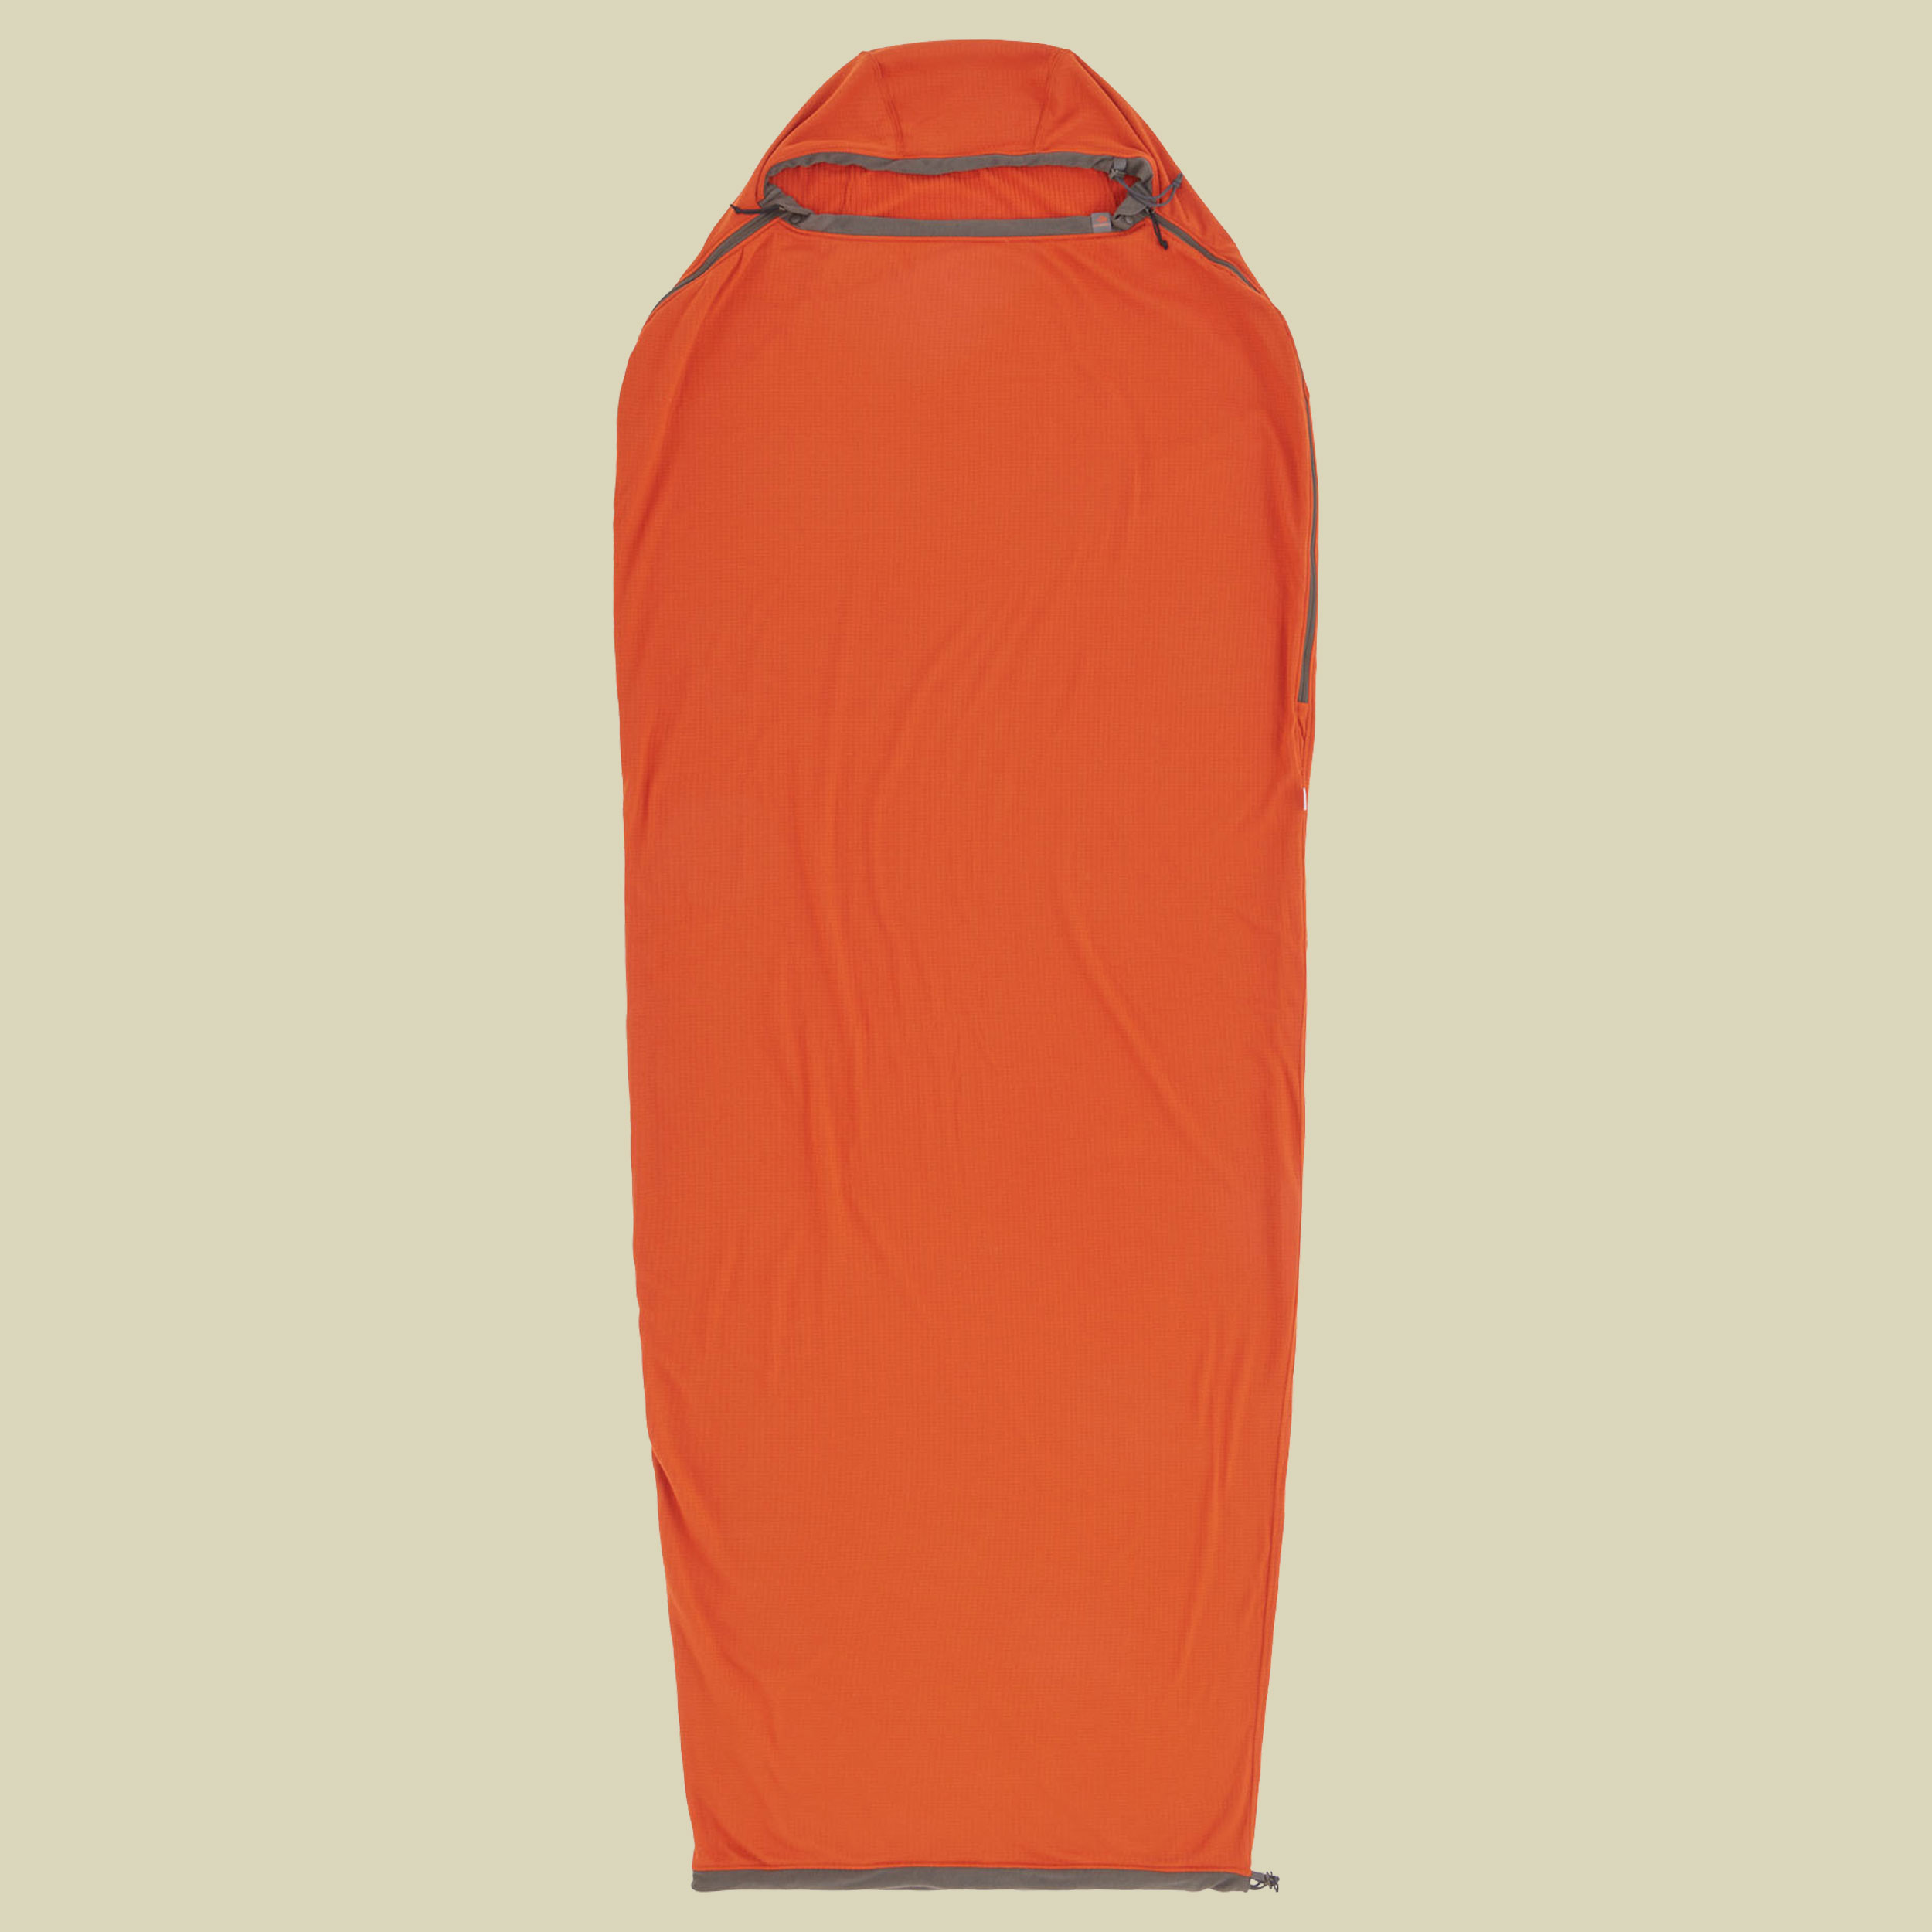 Reactor Fleece Sleeping Bag Liner - Mummy w/ Drawcord Compact rot - picante red